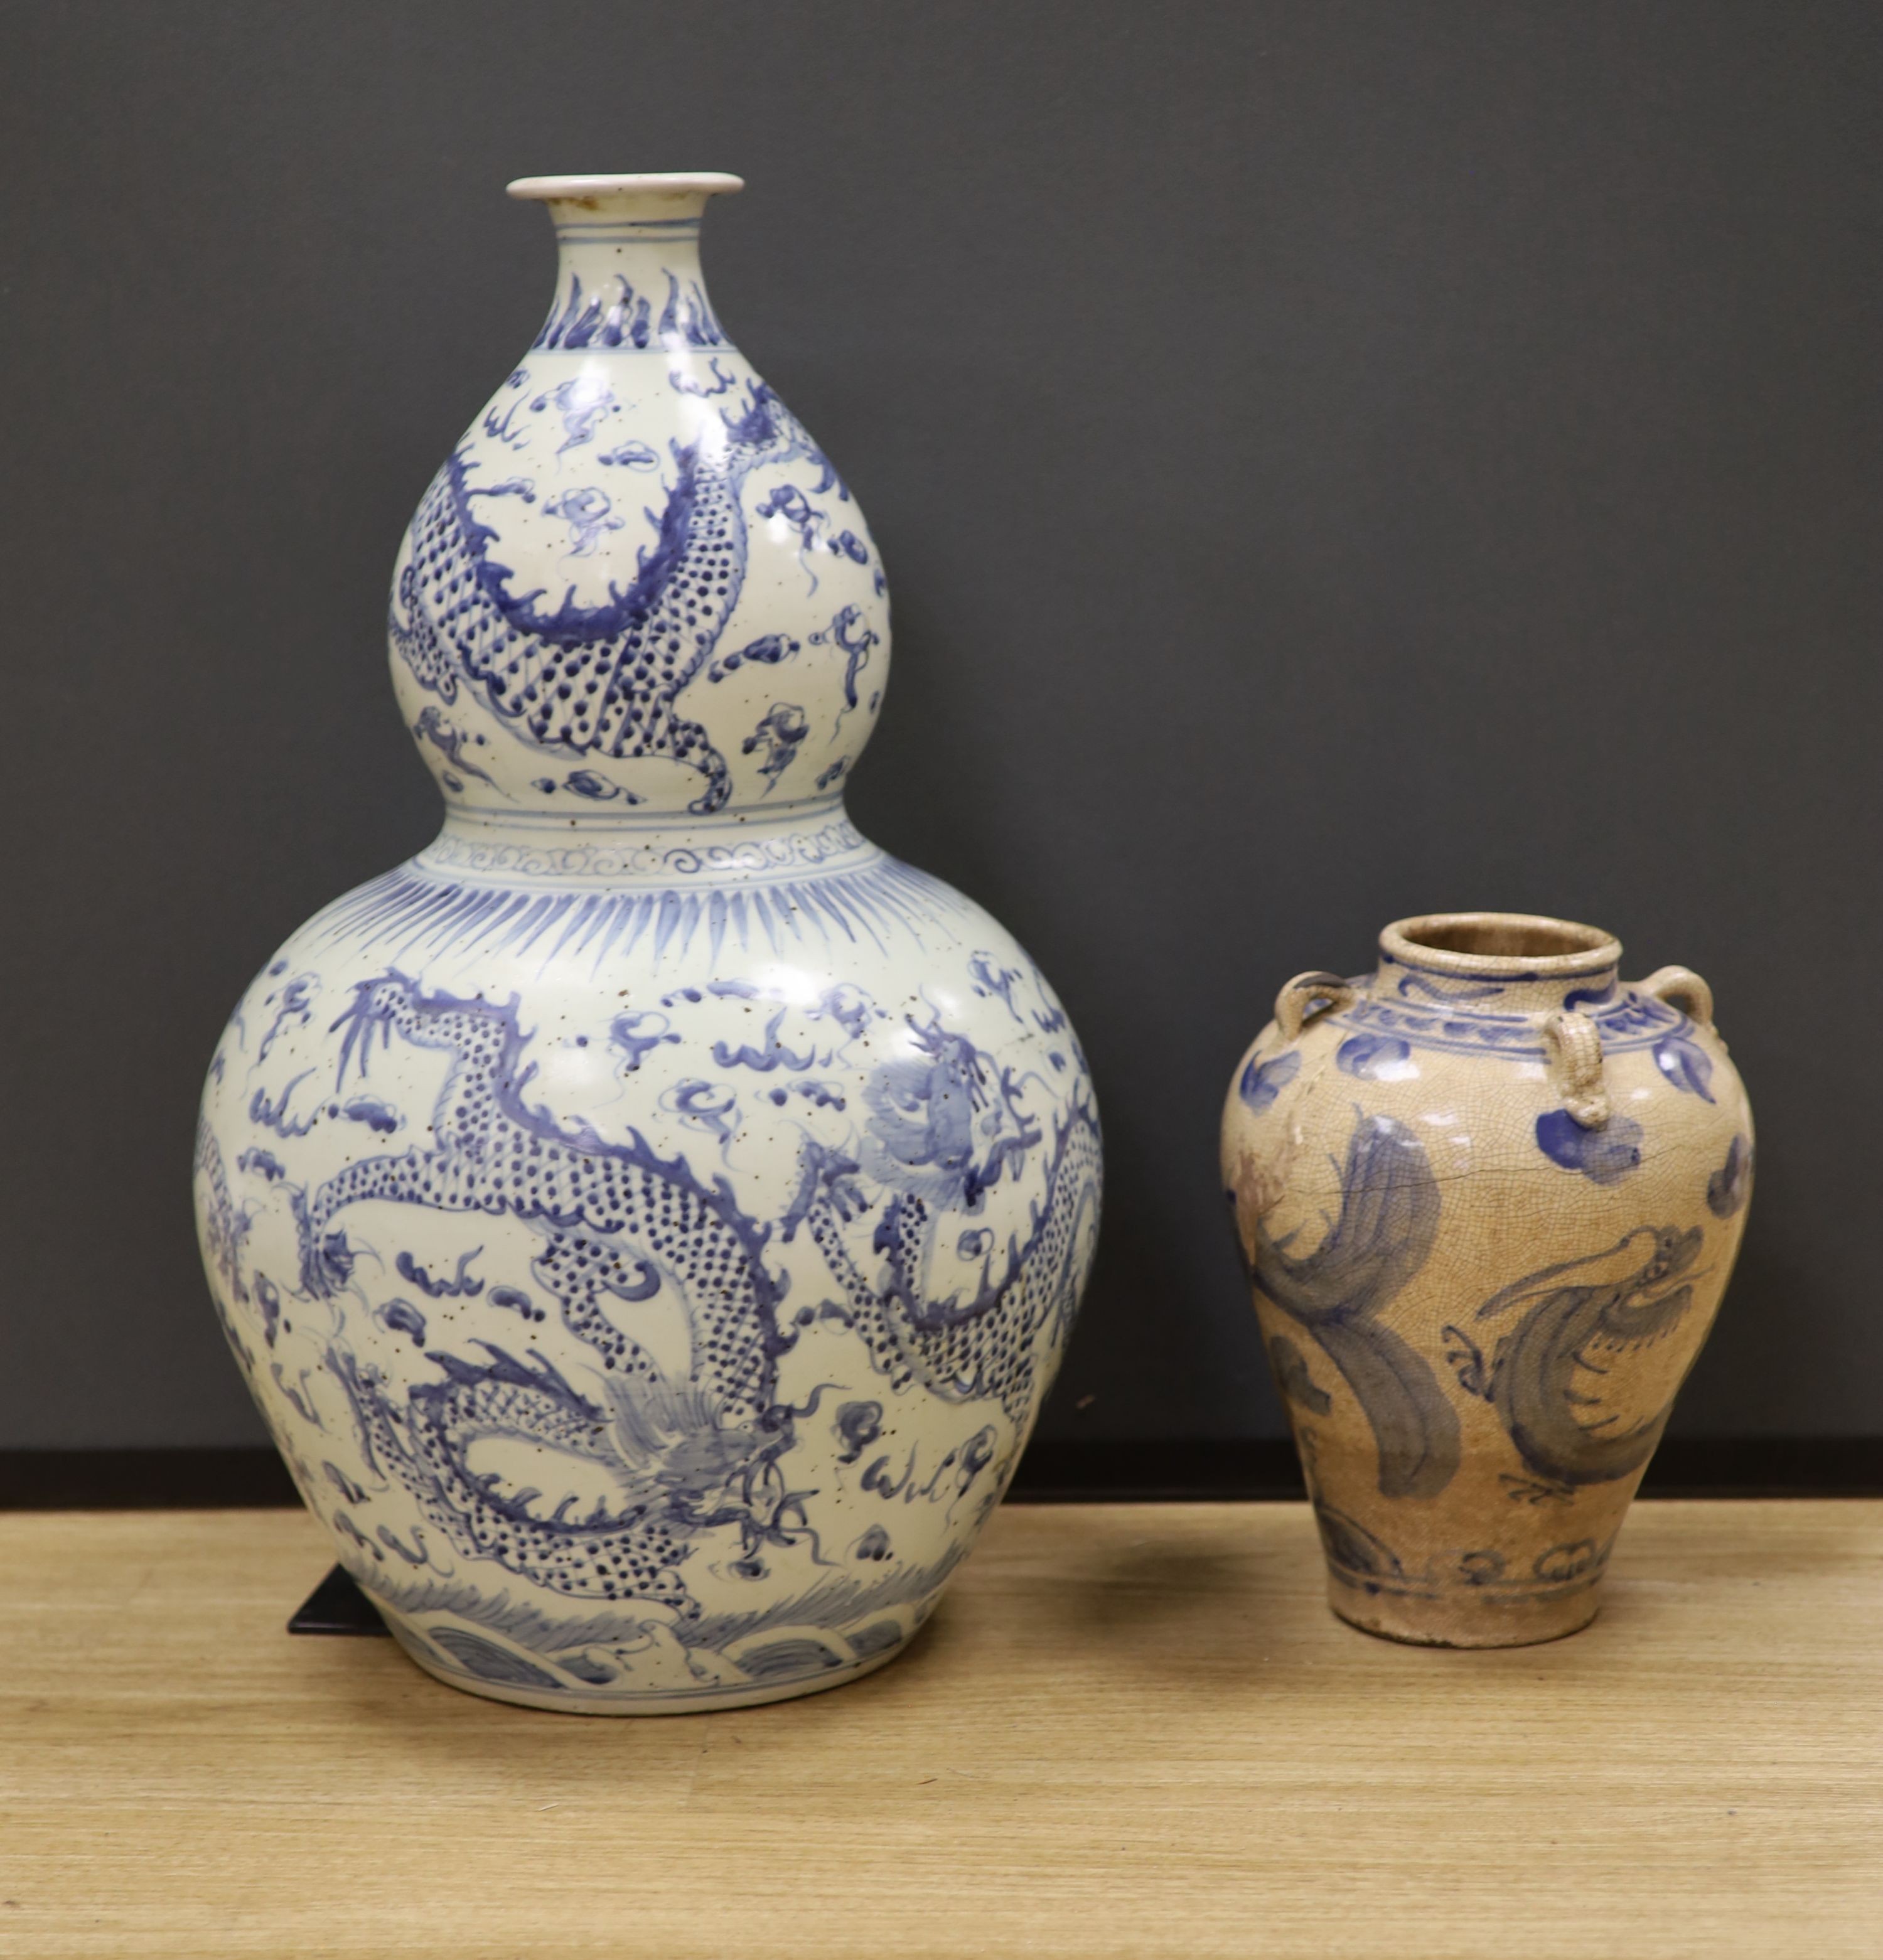 A large Chinese blue and white ‘dragon’ double gourd vase, 64cm high and an Annamese style blue and white crackle glaze jar